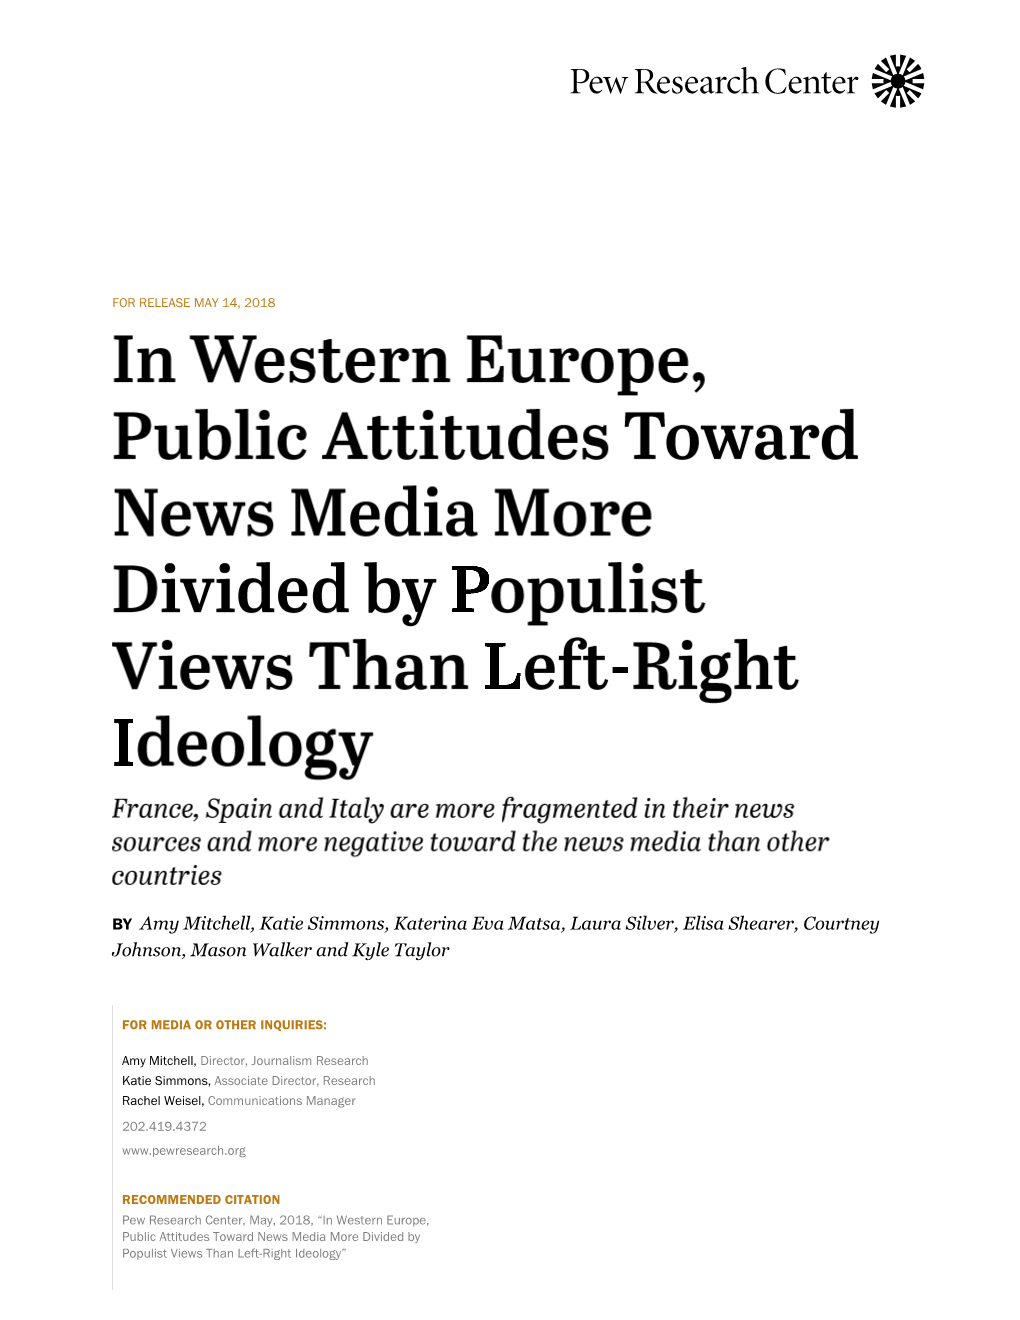 In Western Europe, Public Attitudes Toward News Media More Divided by Populist Views Than Left-Right Ideology”